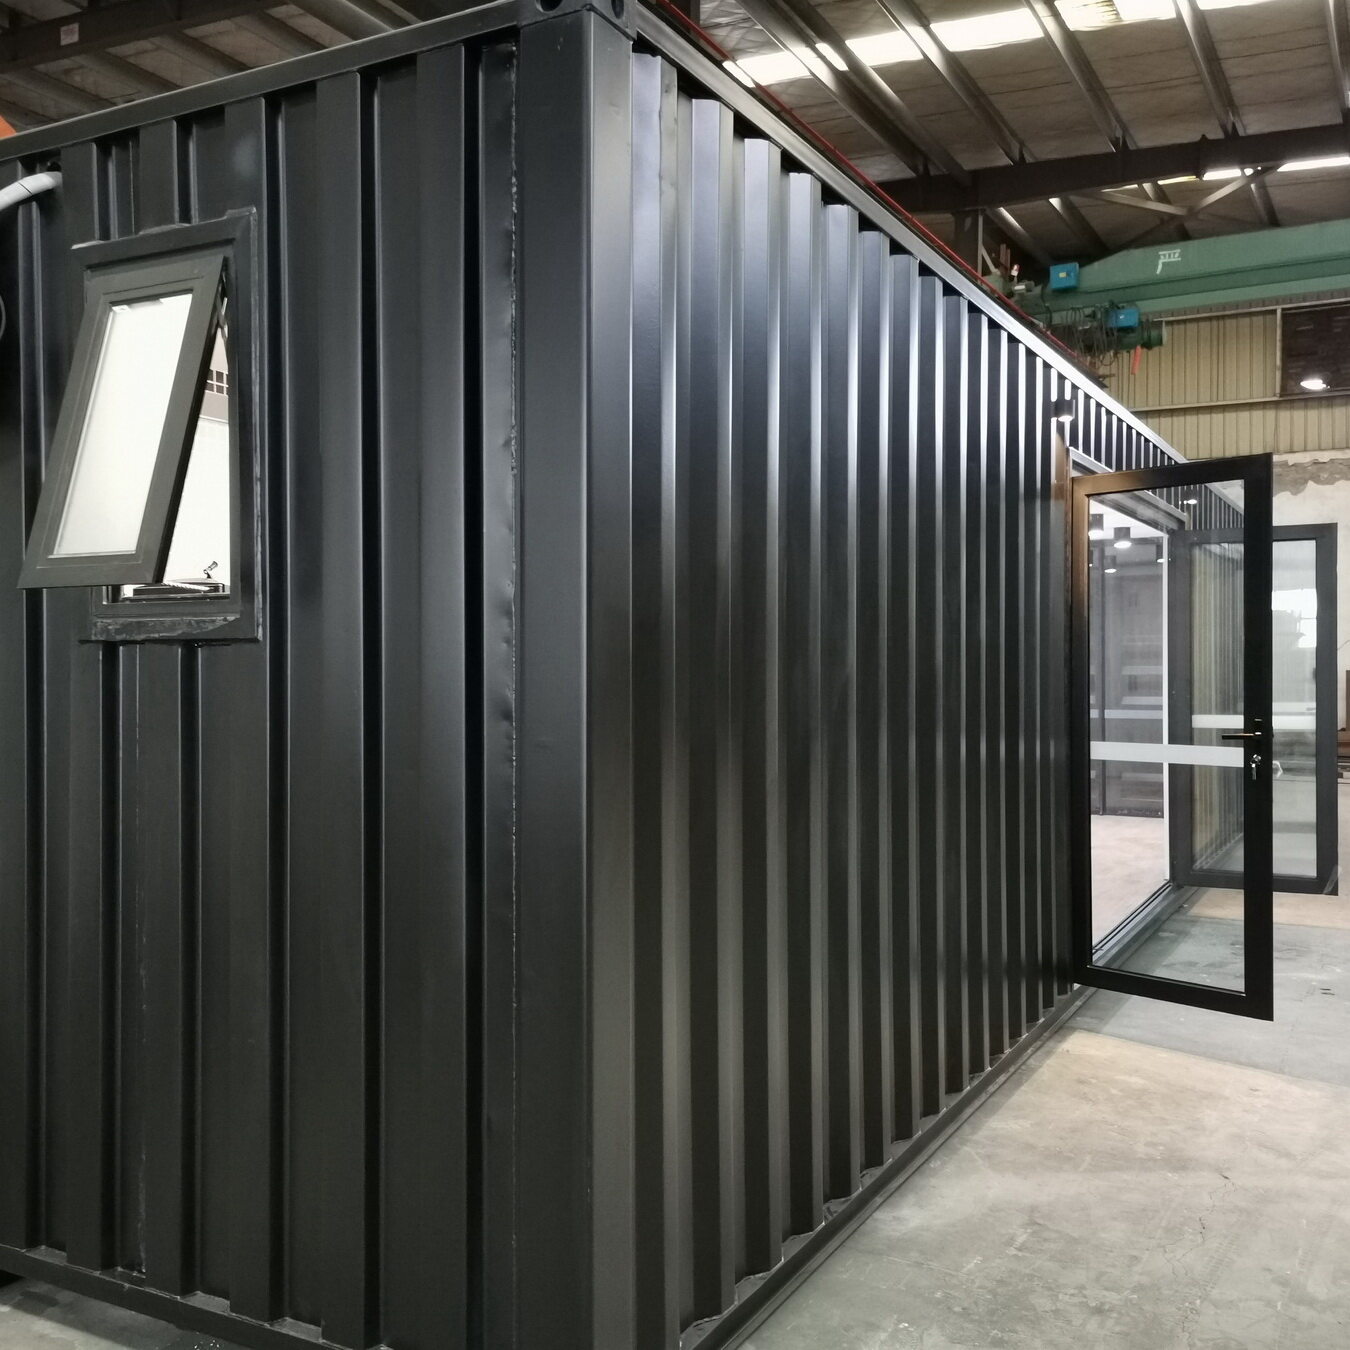 Modular Tiny House Container House Manufacturer: Revolutionizing the Housing Industry